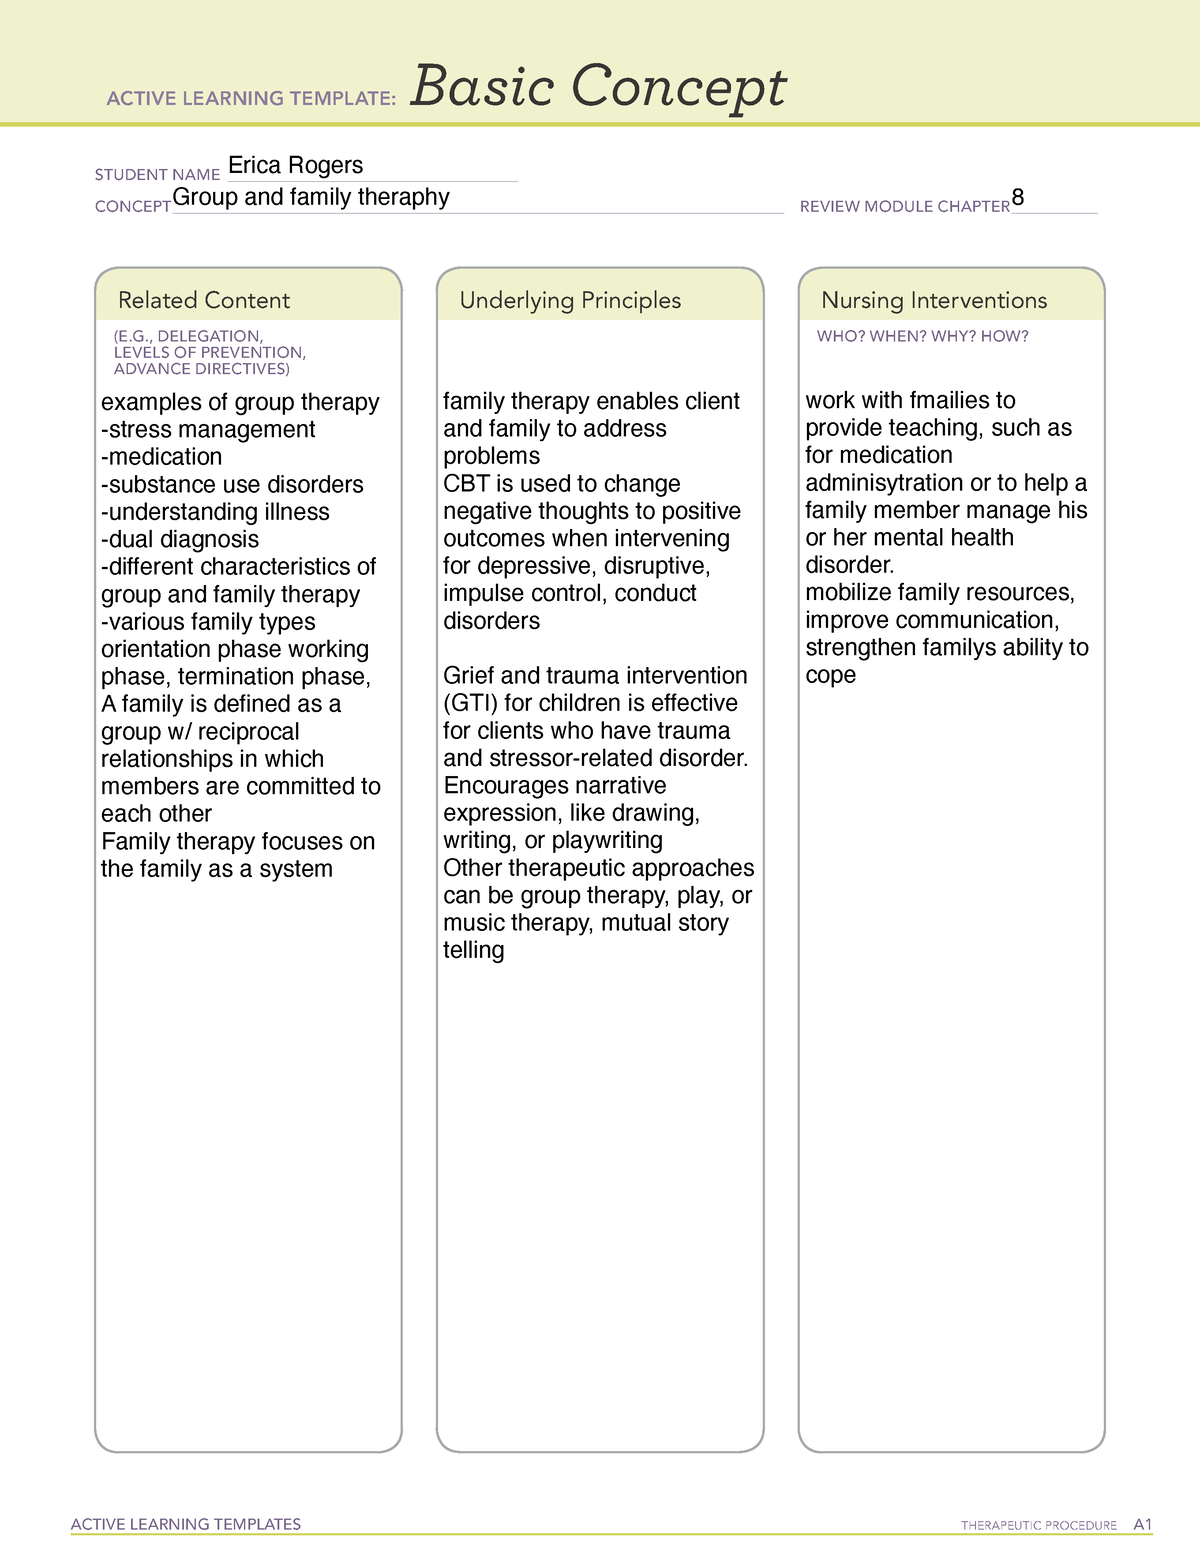 Active Learning Template Basic Concept3 ACTIVE LEARNING TEMPLATES